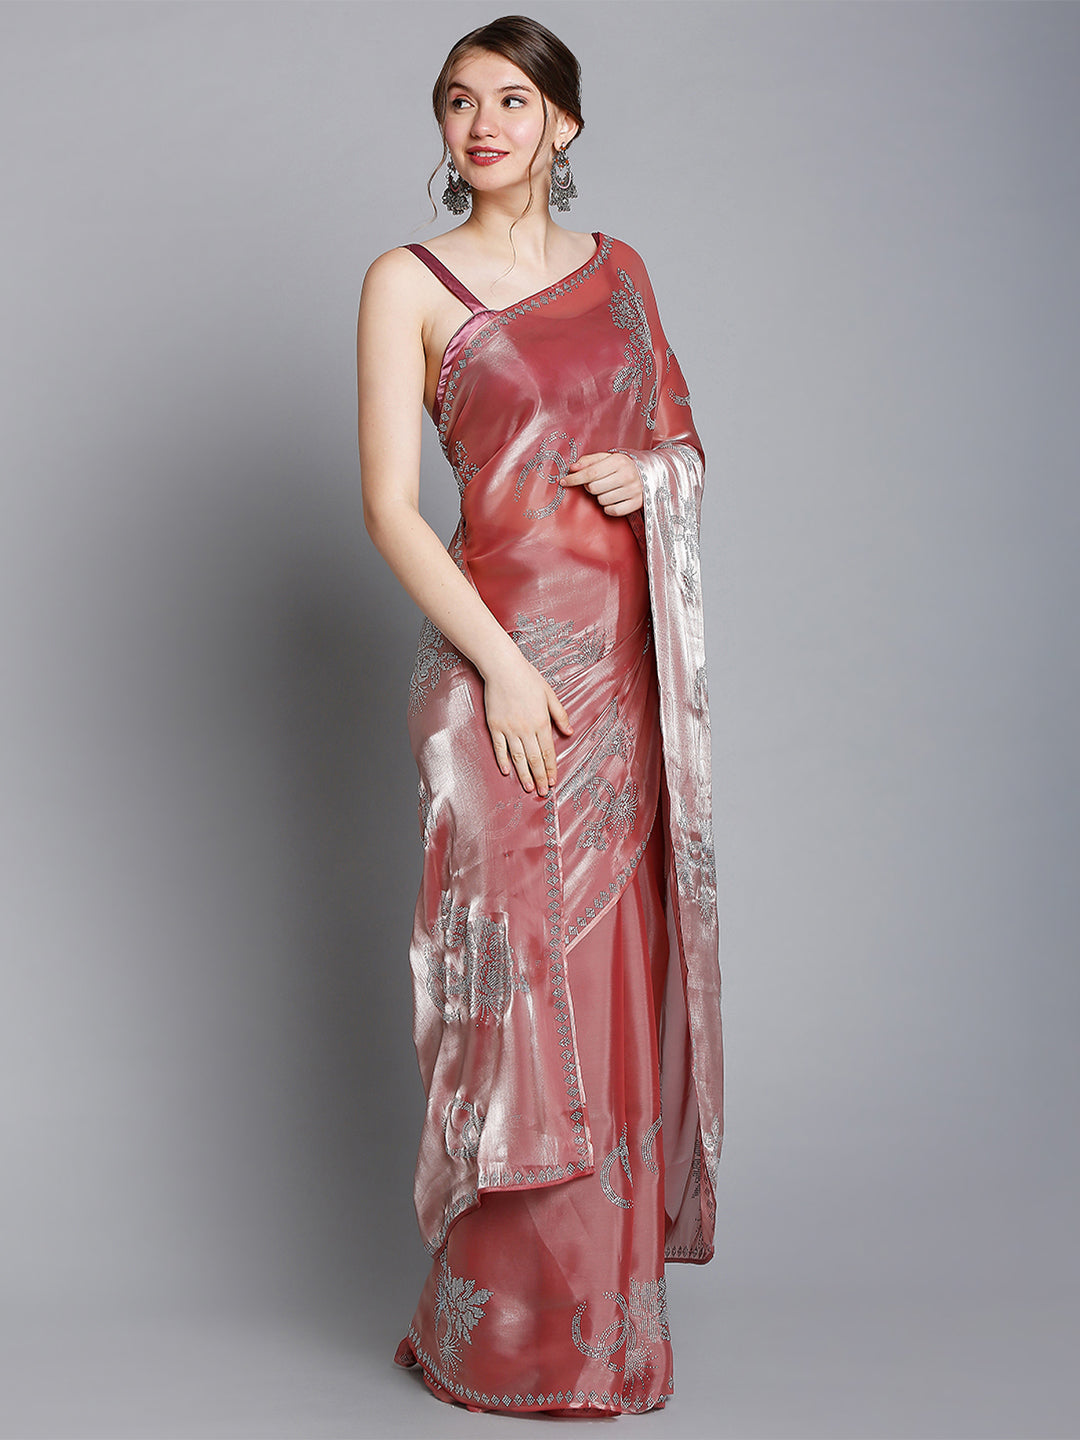 Blush Pink Soft Tissue Saree With Floral Embroidery